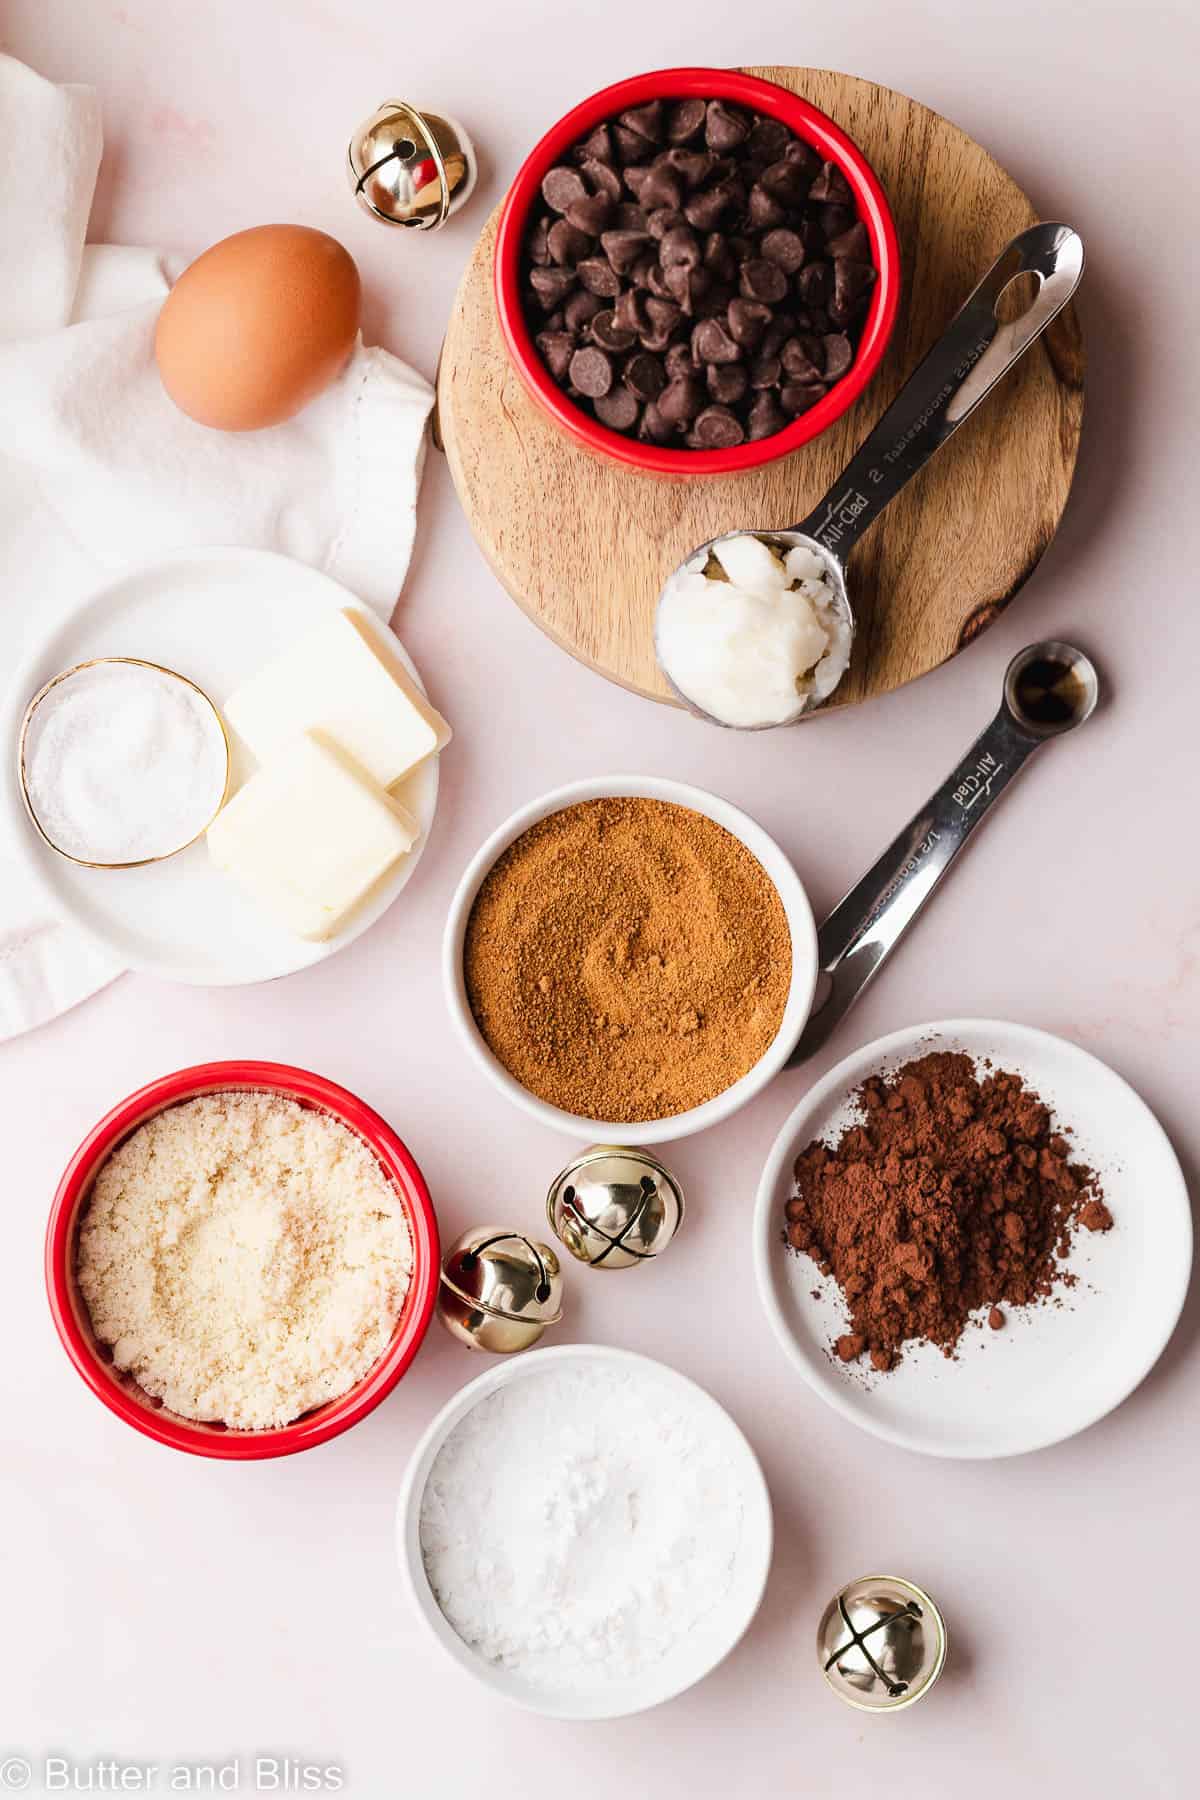 Ingredients for holiday brownies in small bowls arranged on a table.